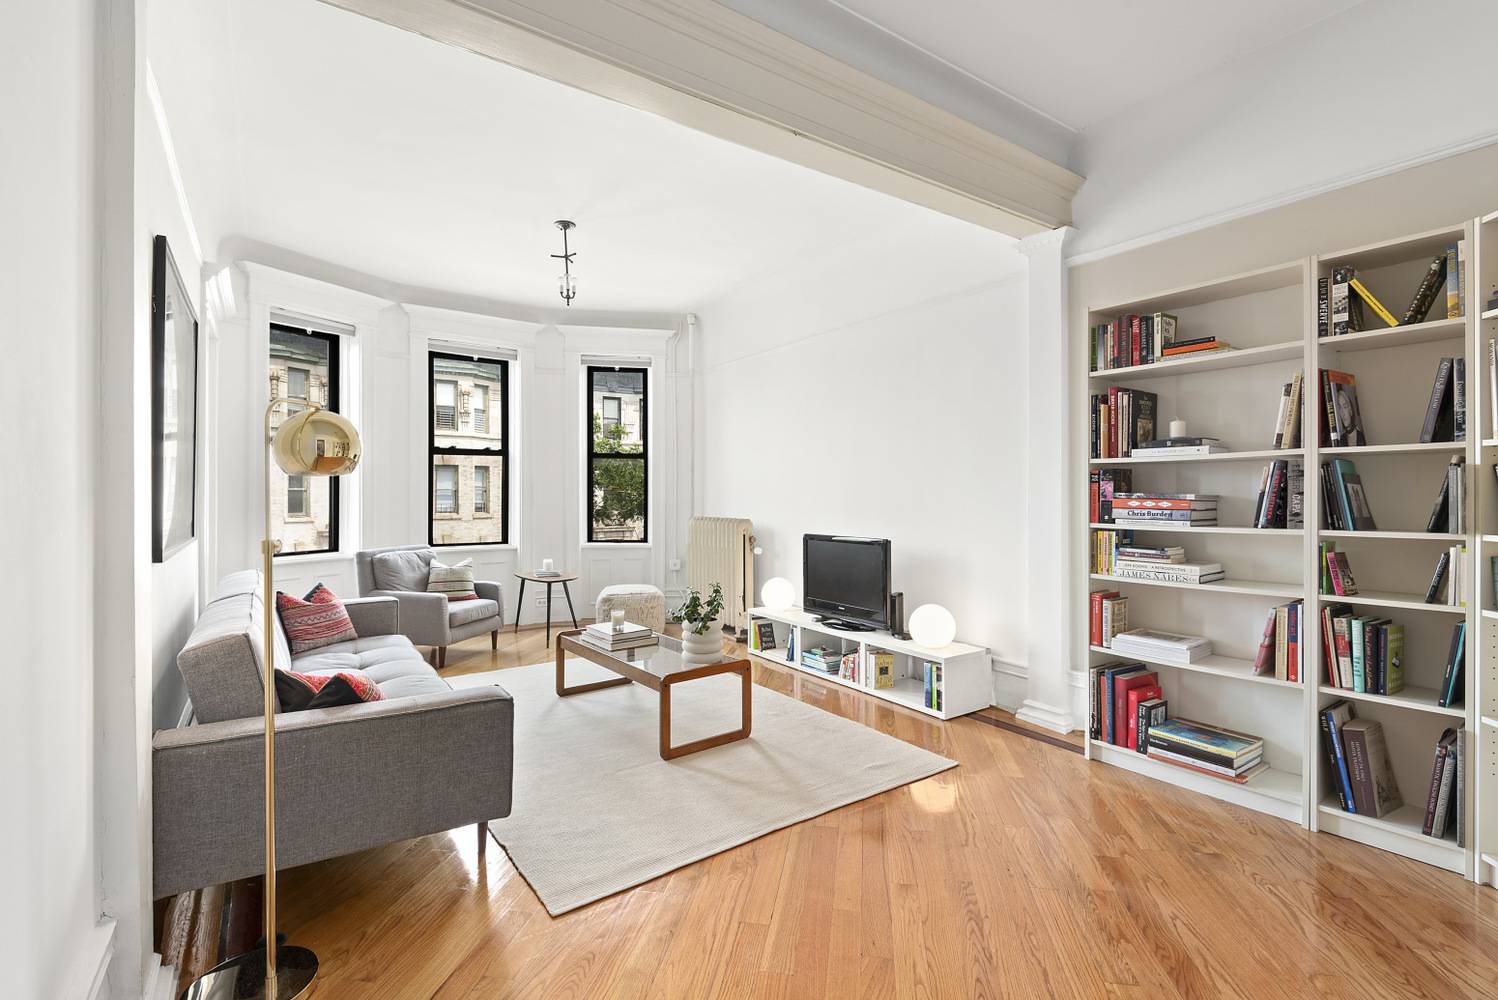 Amazing three bedroom home with additional den office and separate dining room with best light is now available for rent in the desired neighborhood of Clinton Hill historic district.